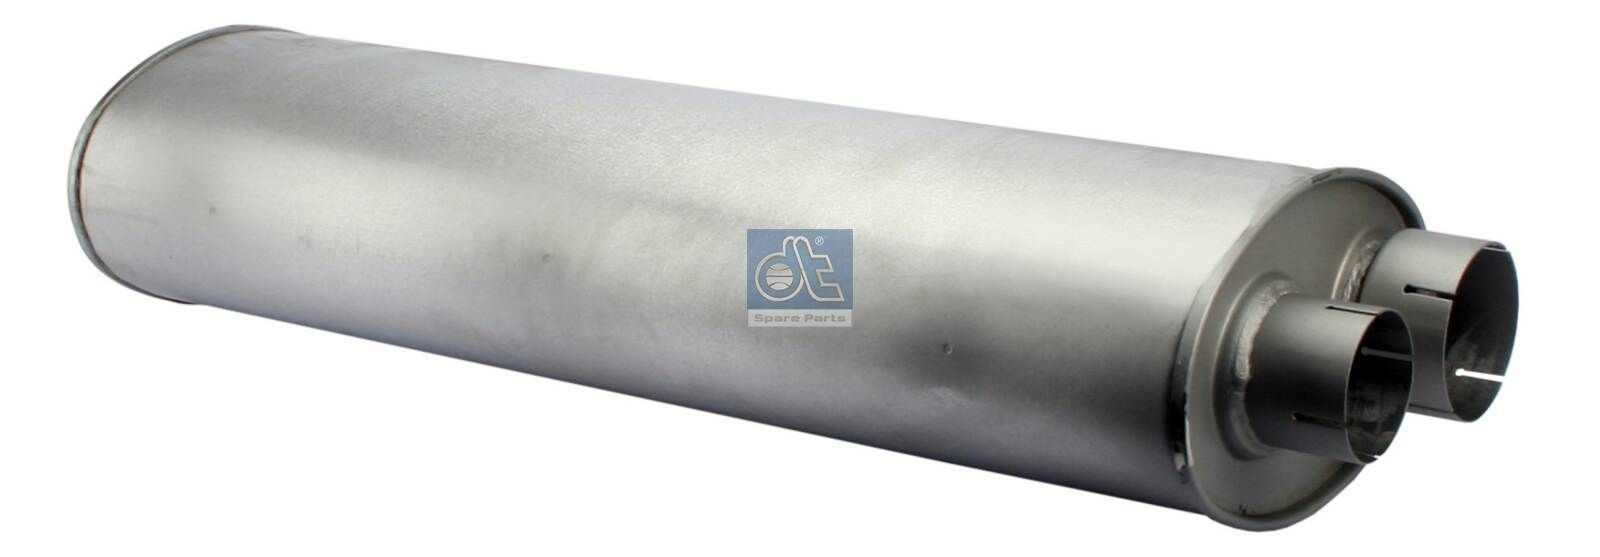 DT Spare Parts 3.25016 Middle- / End Silencer 81 15101 0352